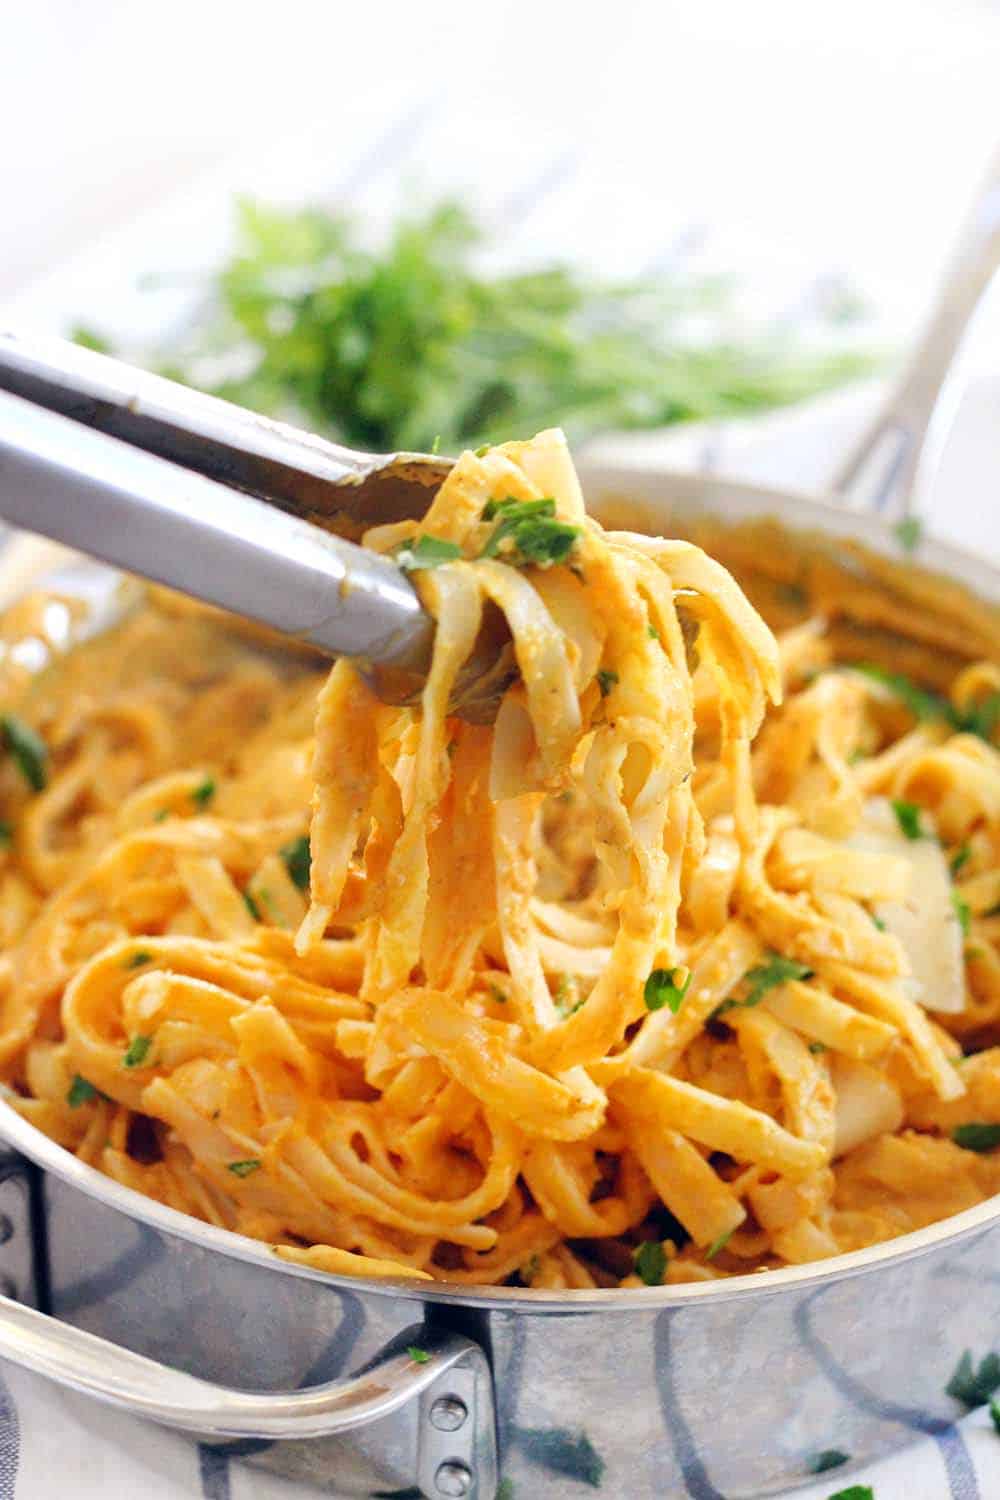 With 60% fewer calories than traditional Alfredo sauce, this Pumpkin Fettucini Alfredo is healthy, creamy, and delicious. It's a great way to sneak veggies into a main course, especially in the fall season!